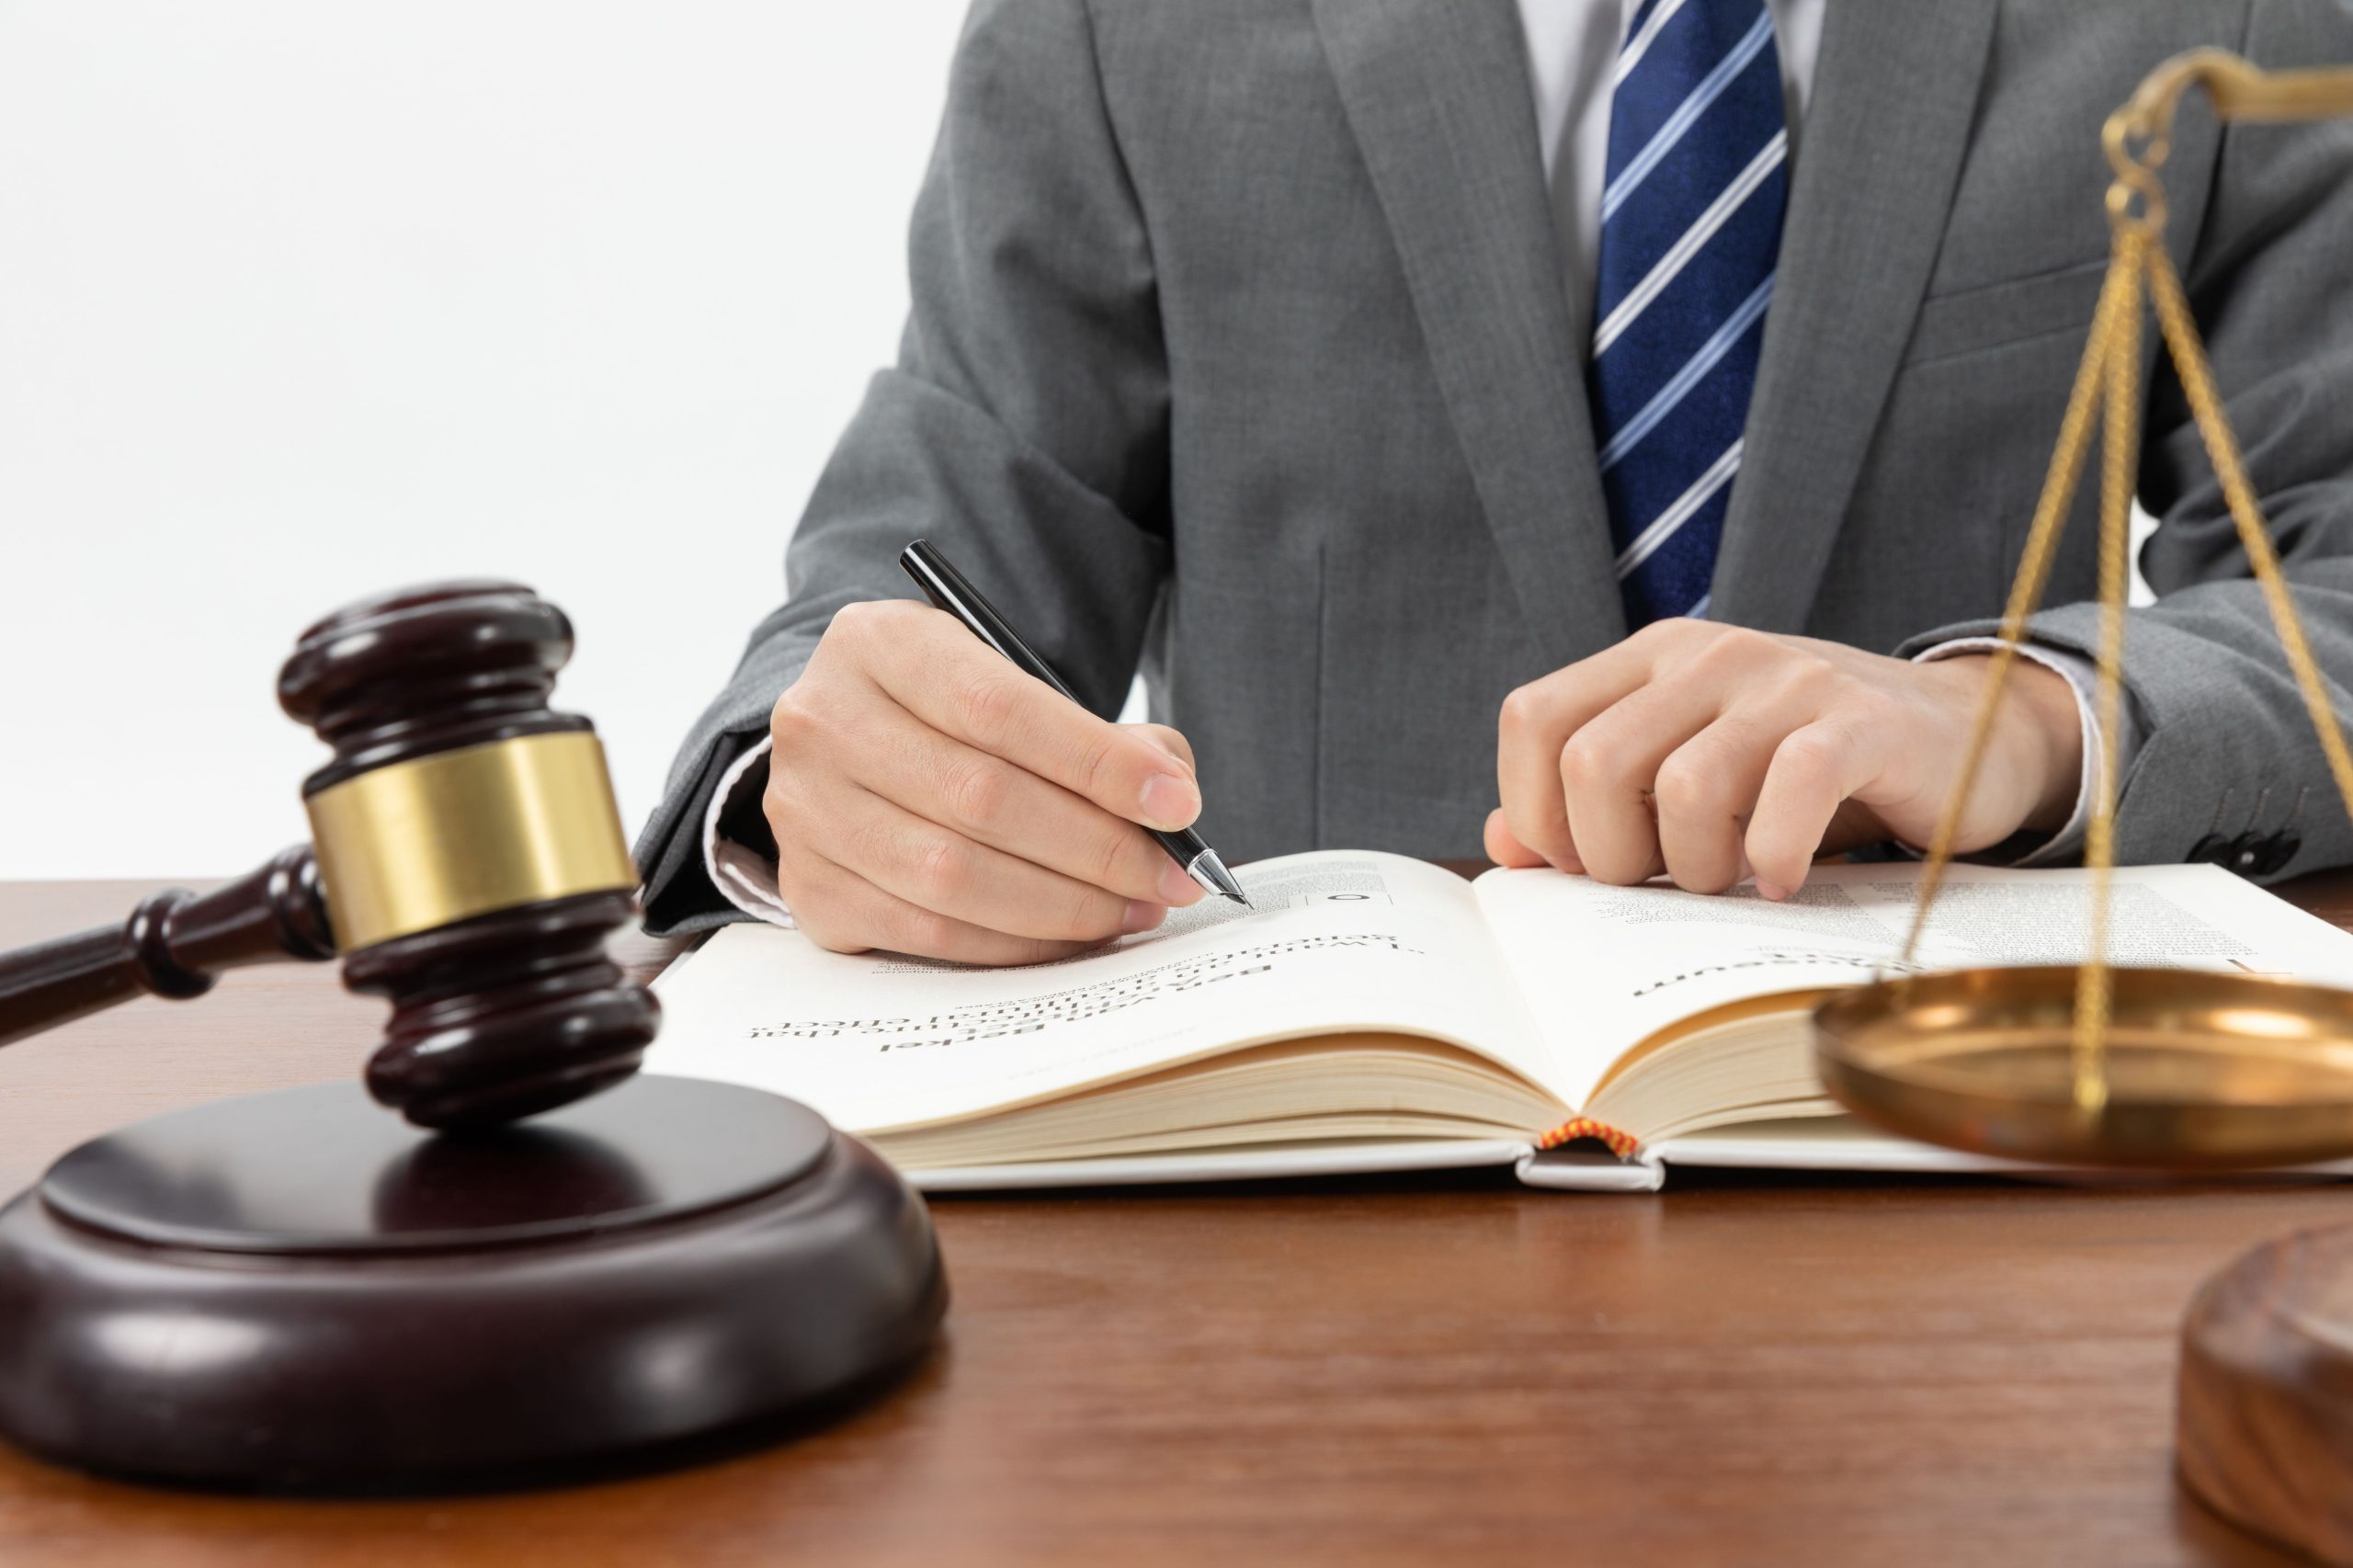 closeup-shot-person-writing-book-with-gavel-table-2-scaled.jpg